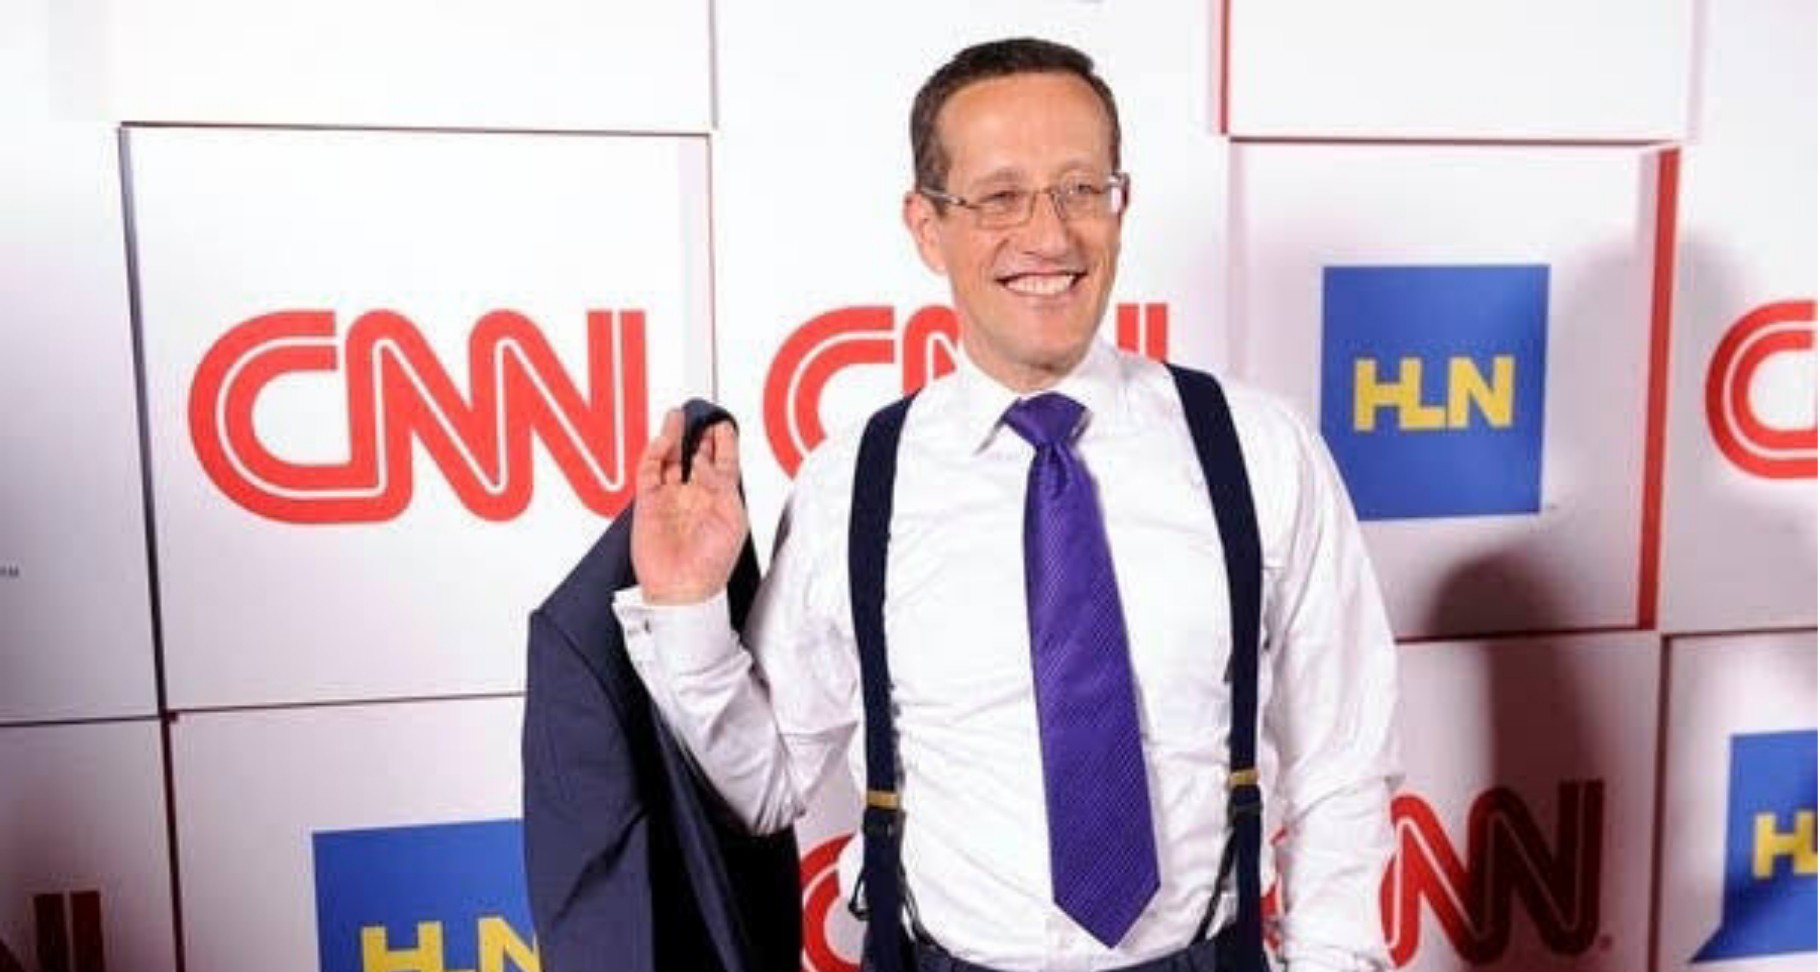 BREAKING: CNN presenter, Quest tests positive for COVID-19